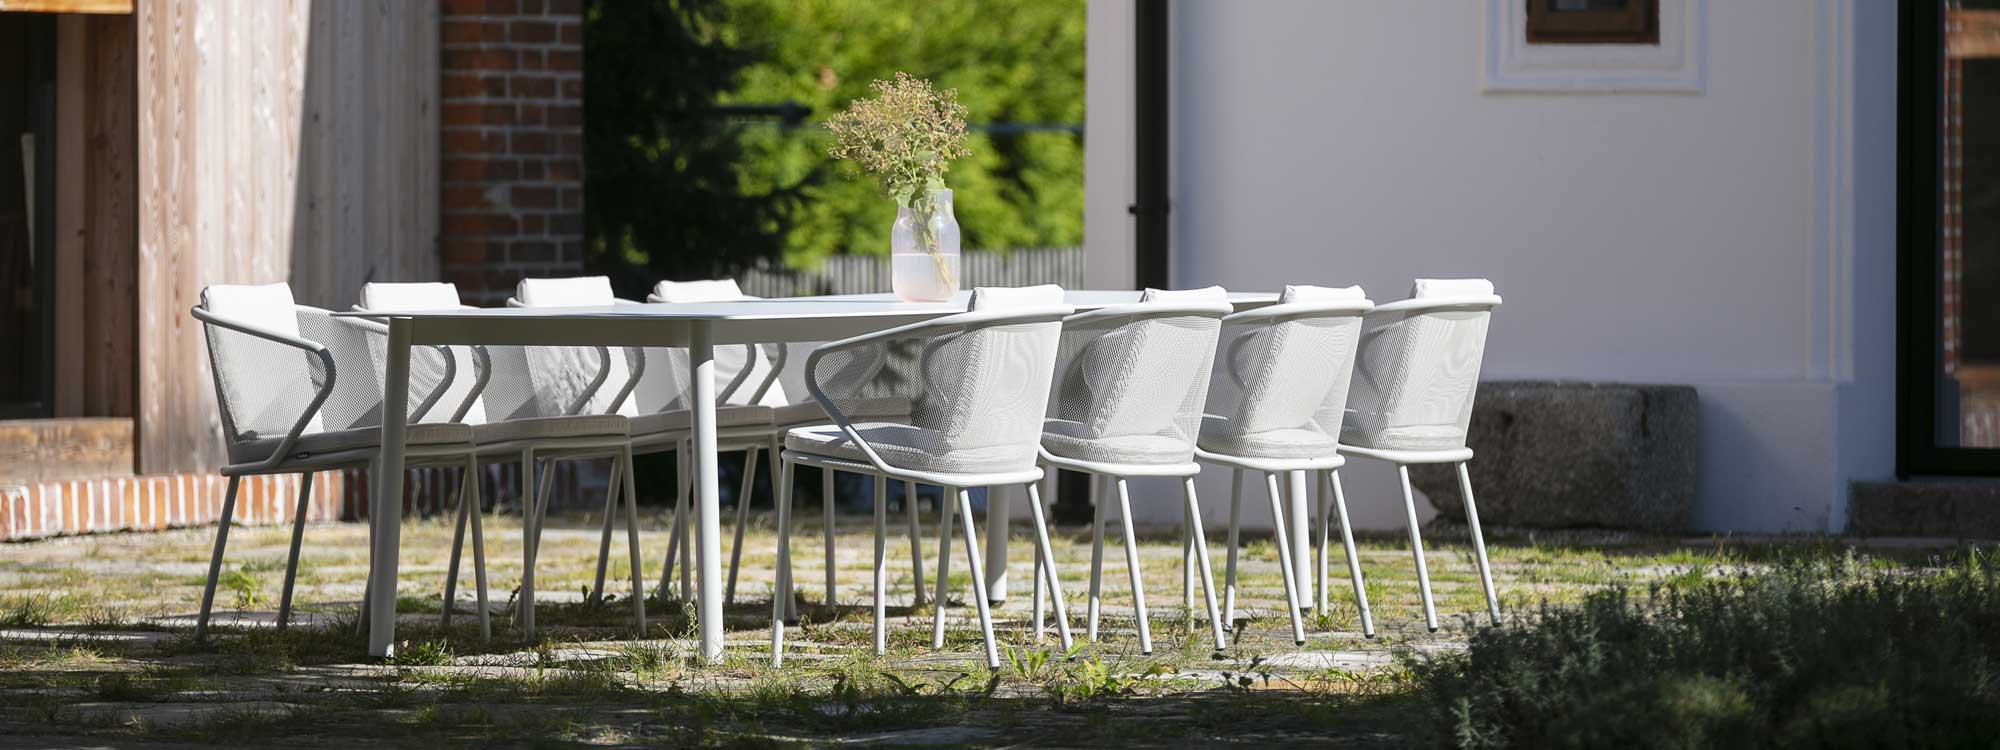 Image of Condor garden chairs around Starling rectangular dining table by Studio Segers for Todus